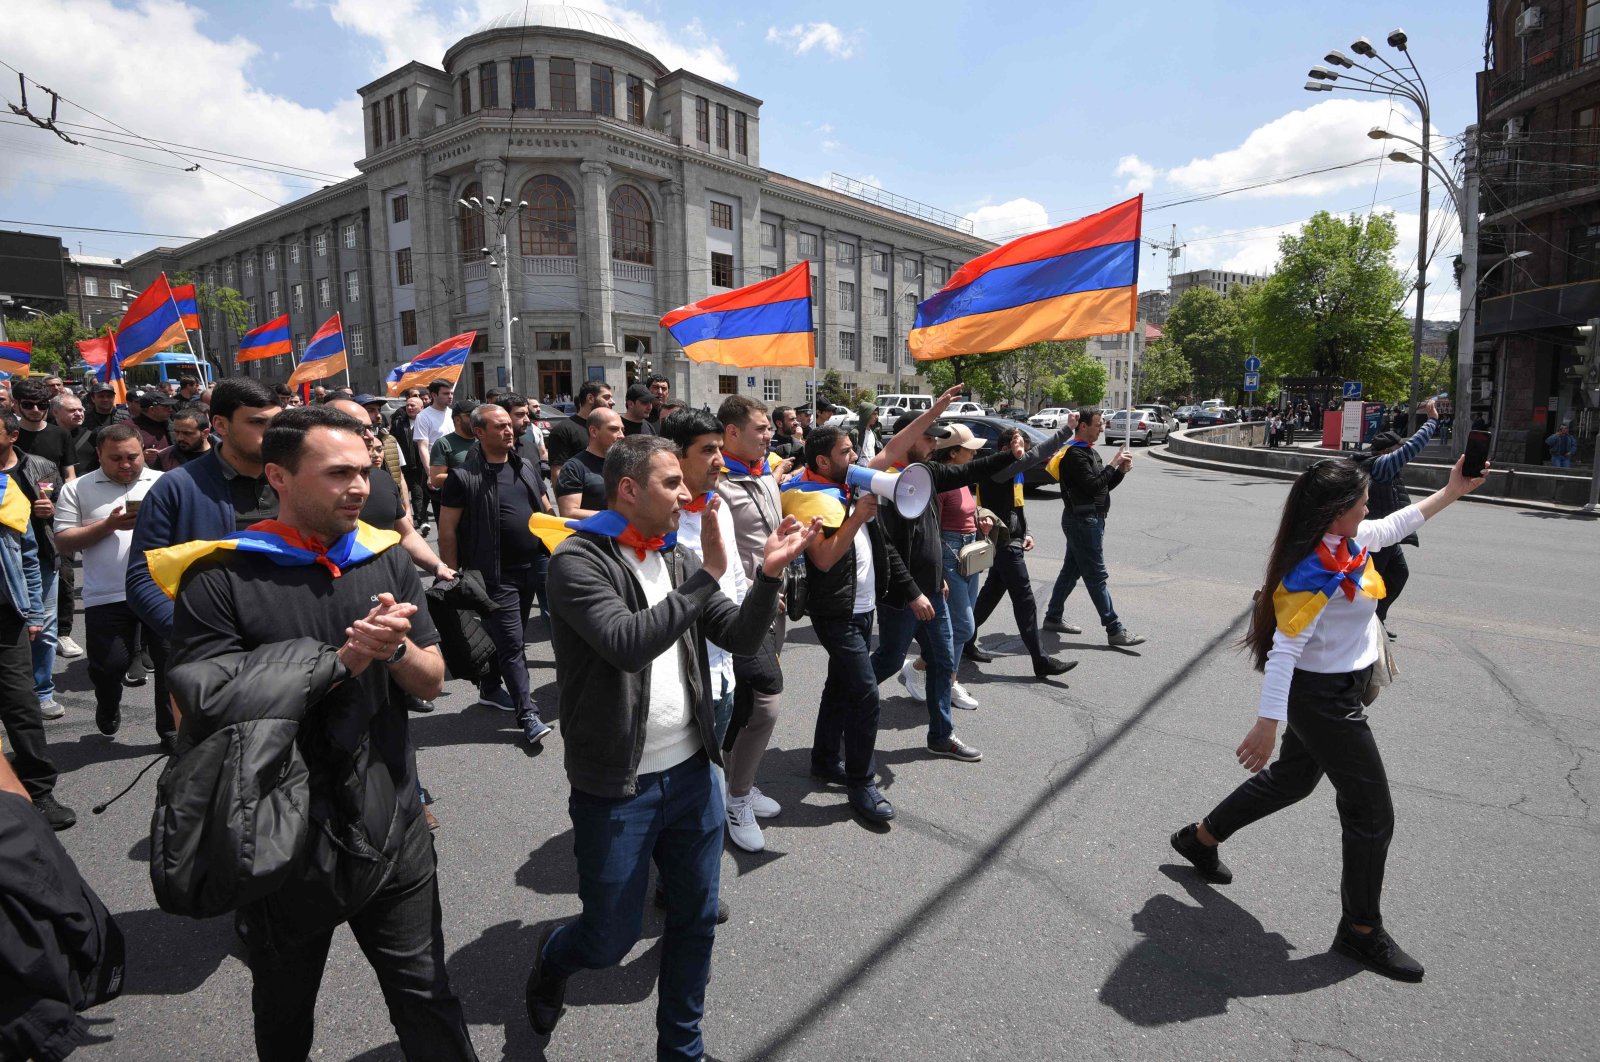 Demonstrators shout slogans and hold Armenian flags as they take part in an opposition rally to protest against the Karabakh concession in Yerevan on May 4, 2022. (AFP)